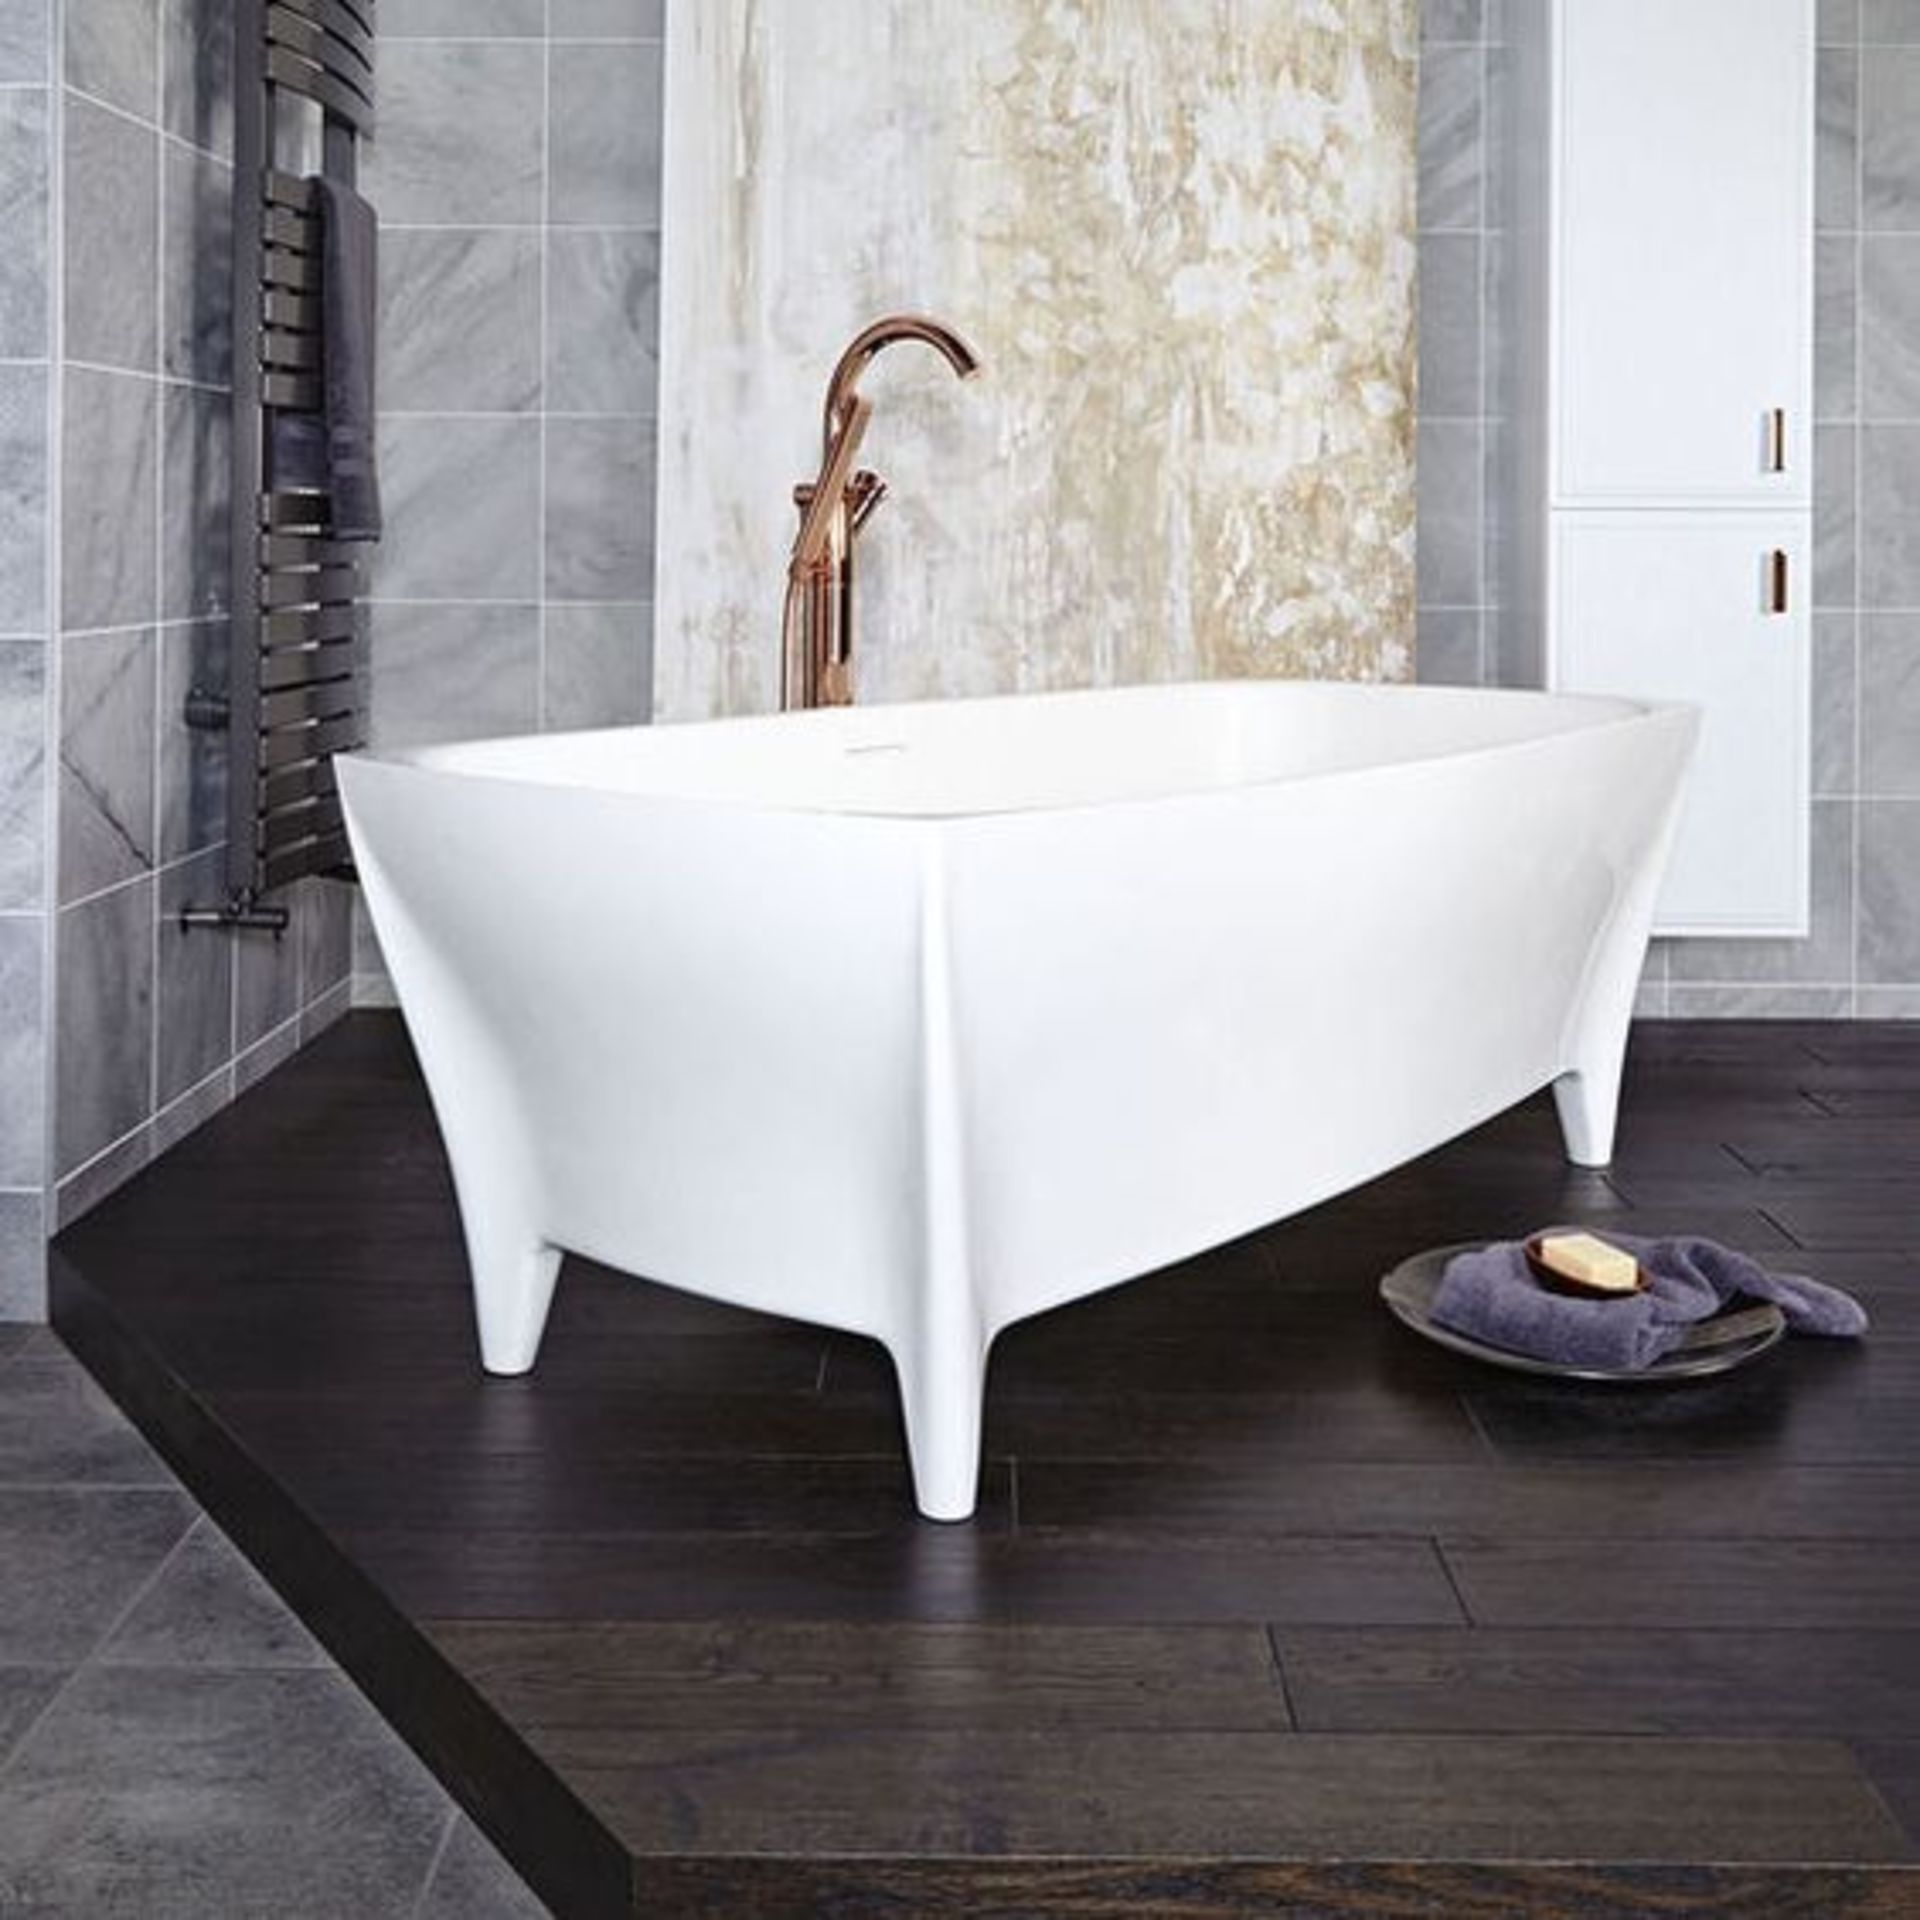 1700 X 800 SOLID TOUCHSTONE TRANSITION DOUBLE ENDED FREE STANDING BATH. NEW, PACKAGED & UNUSED - Image 2 of 3